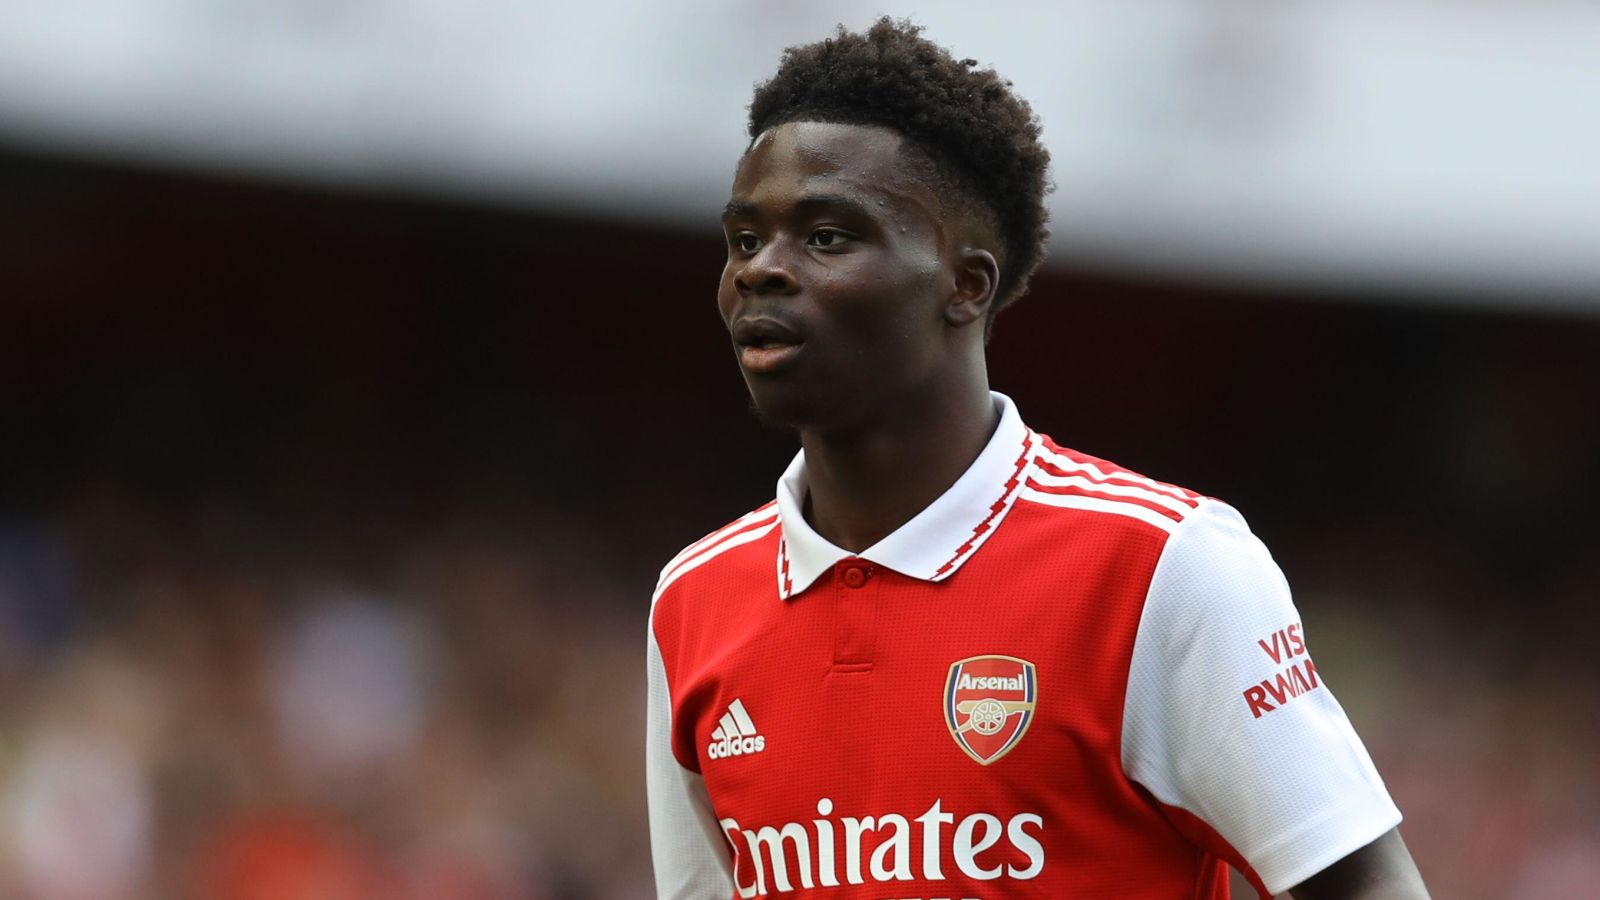 Bukayo Saka privately tells Arsenal his final decision on new contract offer that could create new hierarchy